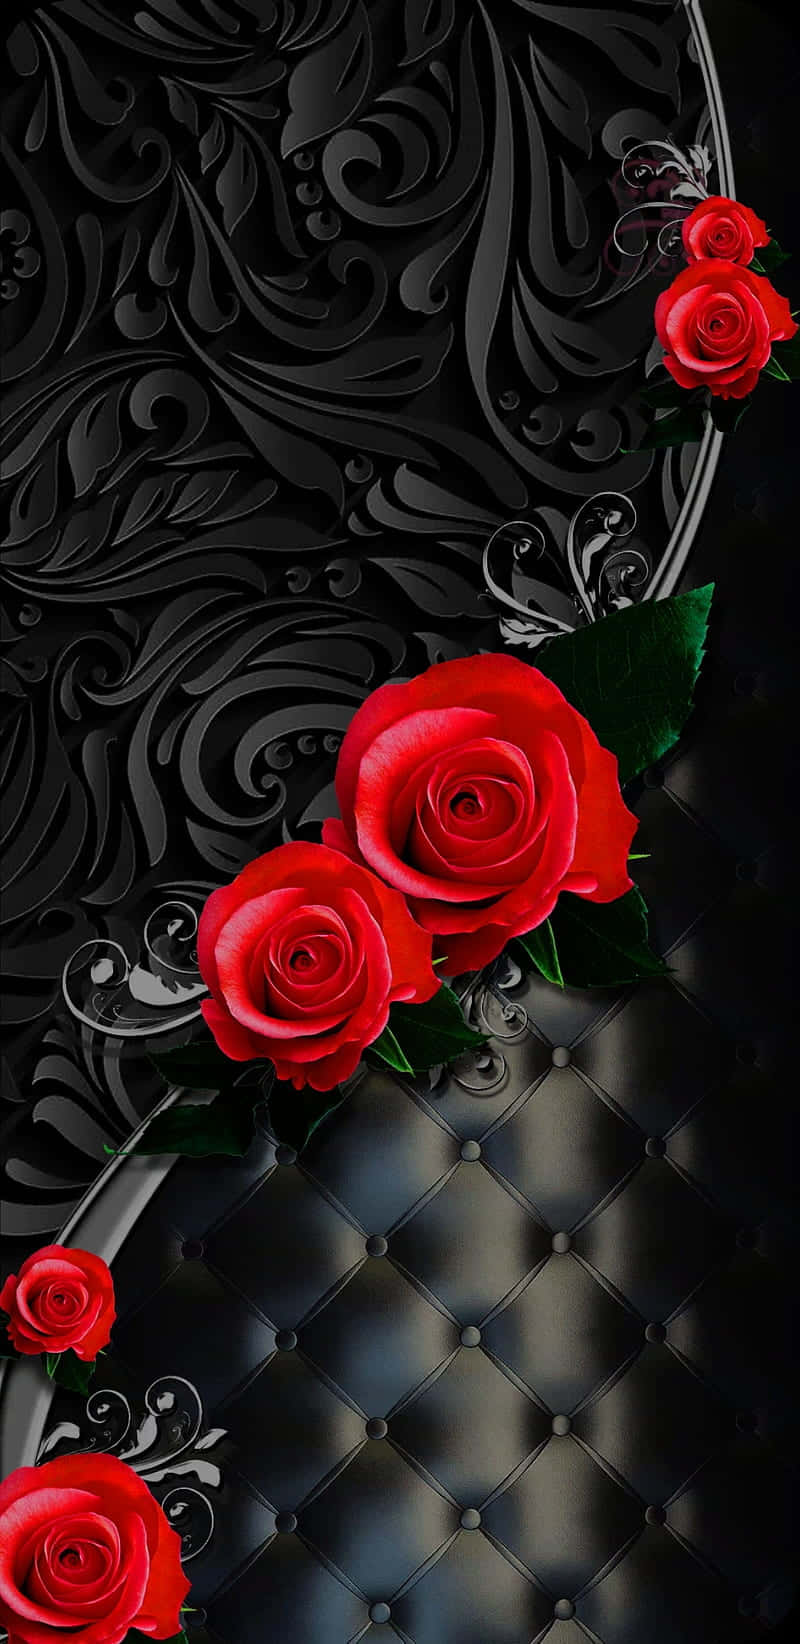 Wall Aesthetic Black Iphone X Roses Background